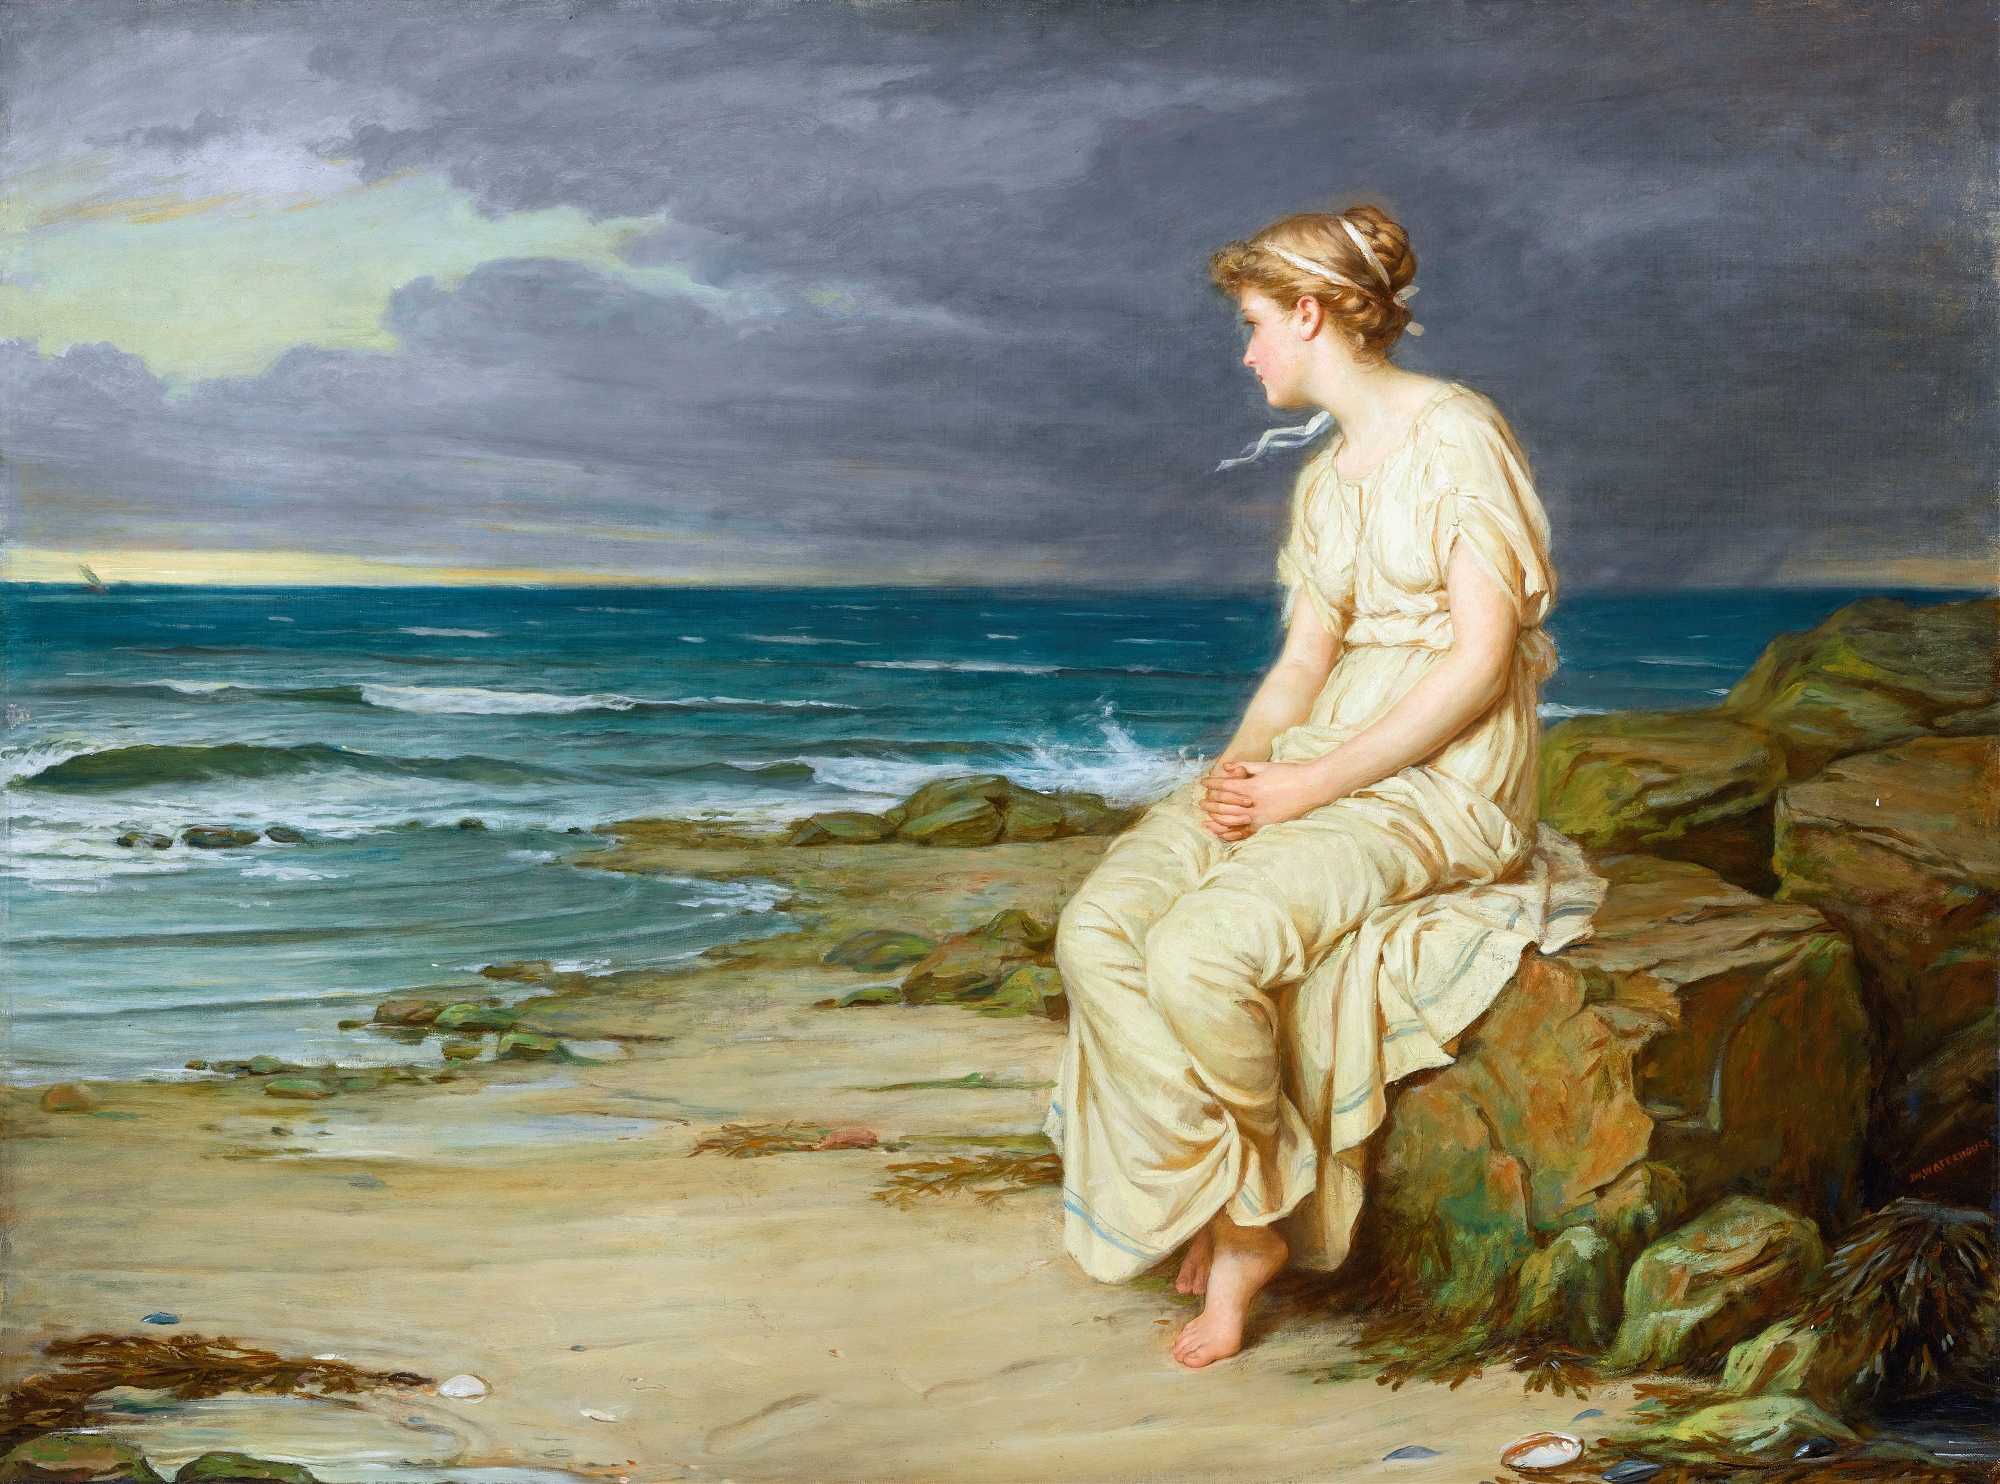 Find out more about John William Waterhouse - Miranda